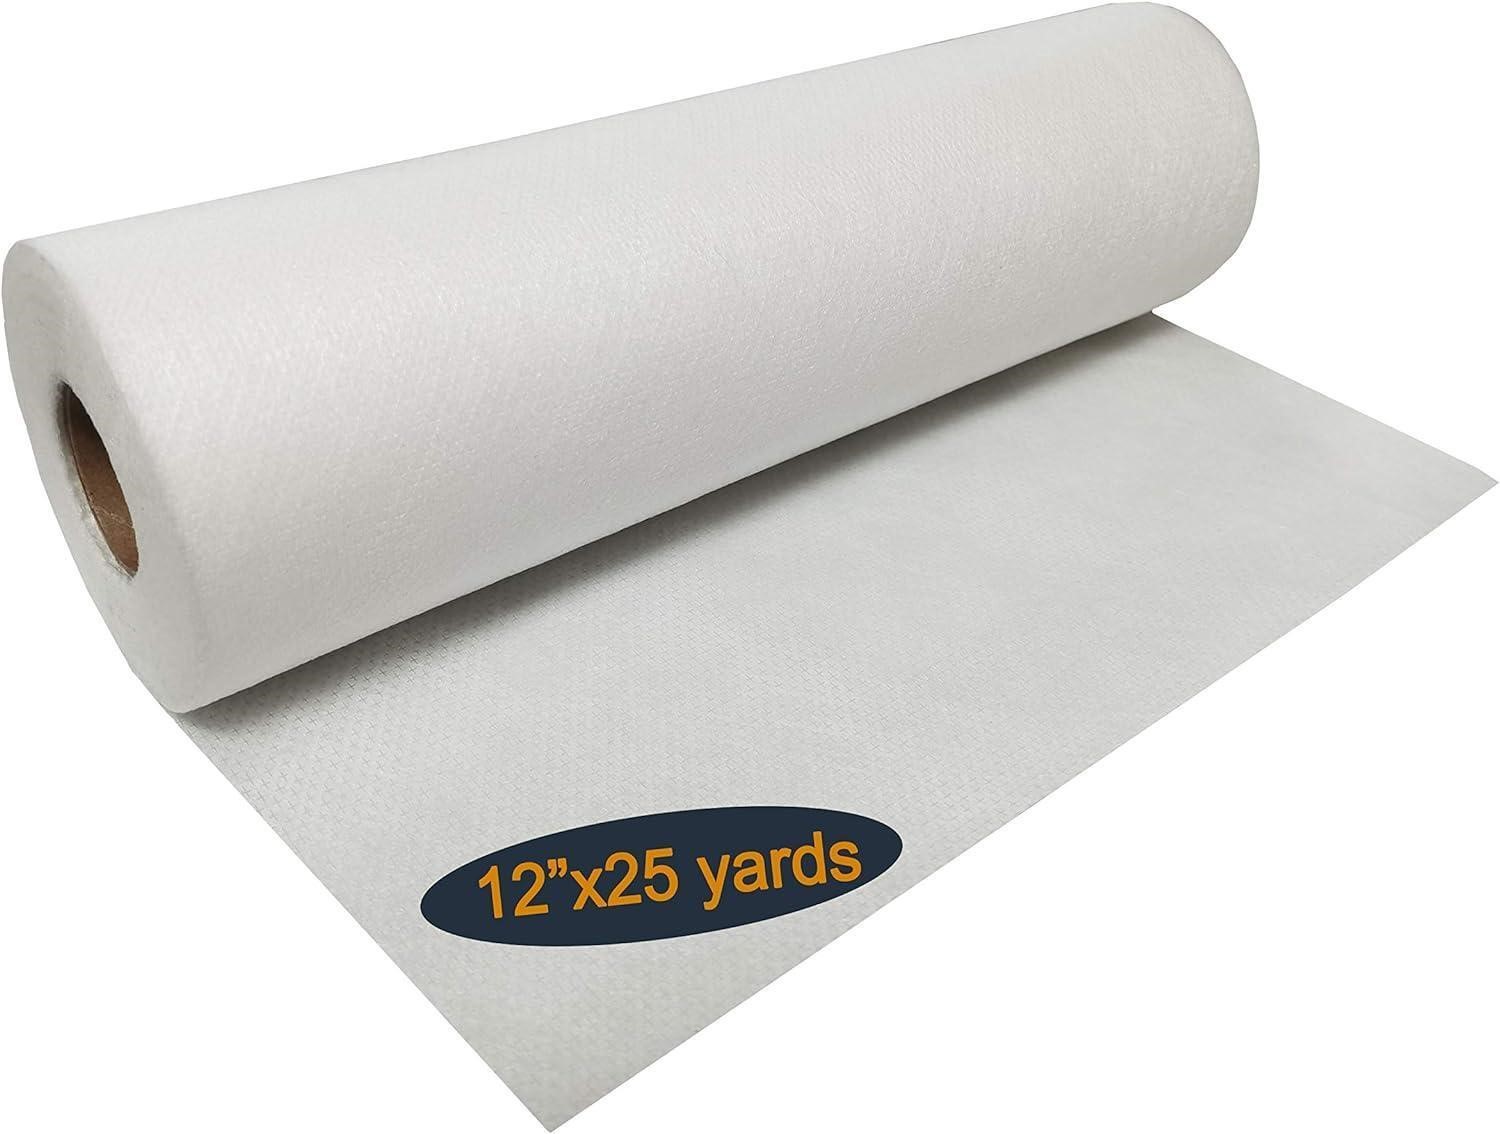 SEALED-Embroidery Stabilizer Roll x2